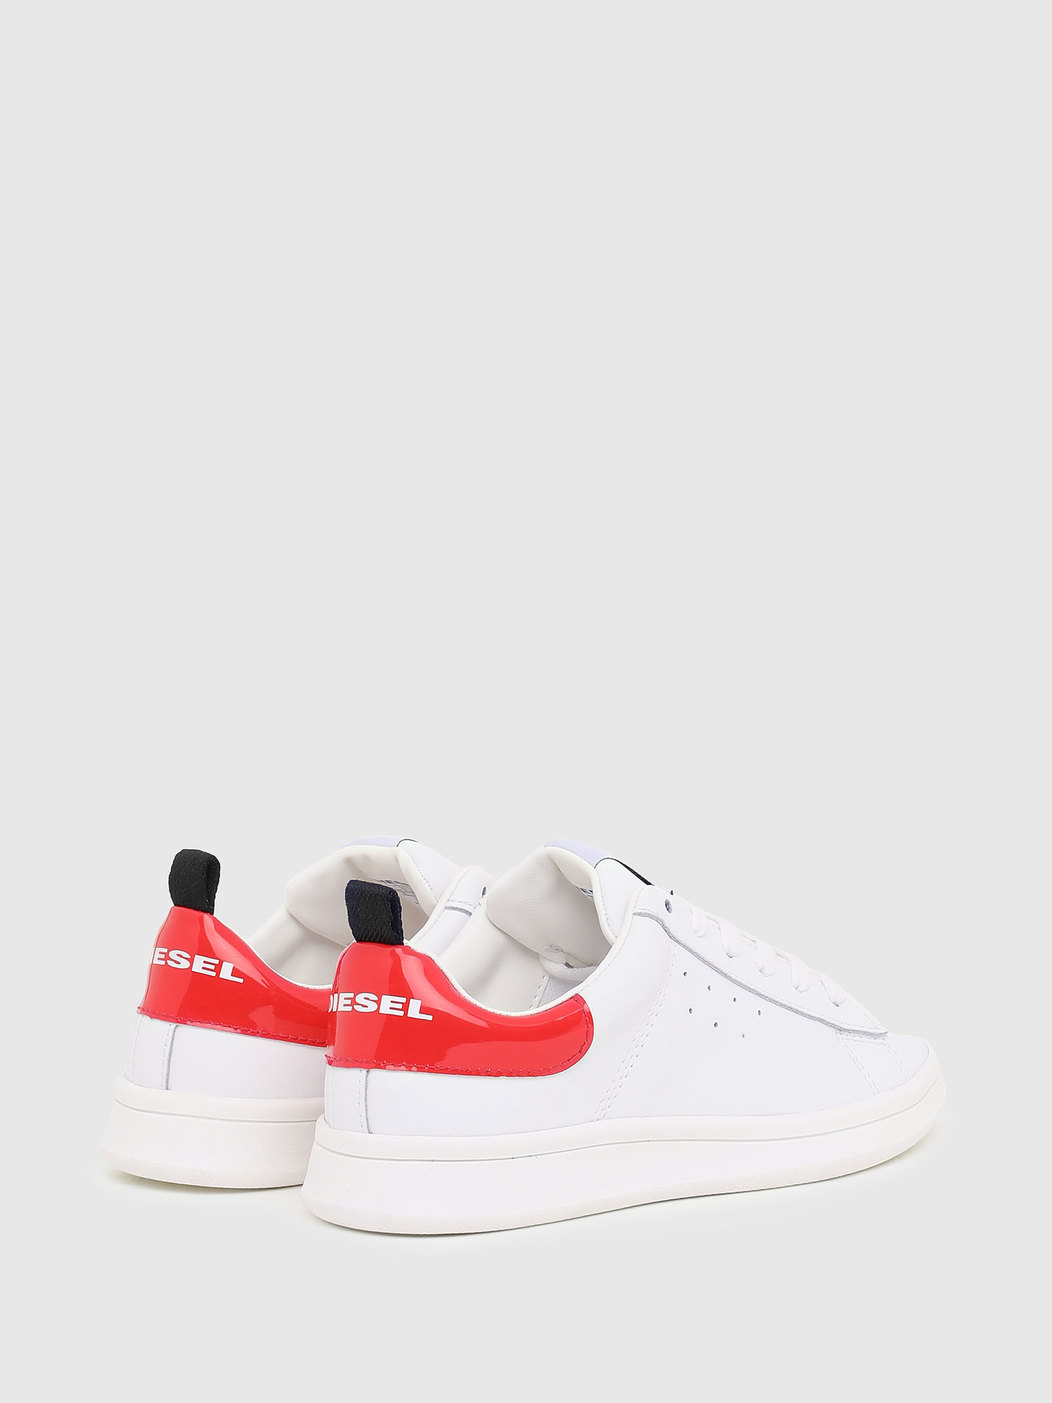 Low Sneakers With Contrasting Heel Tab